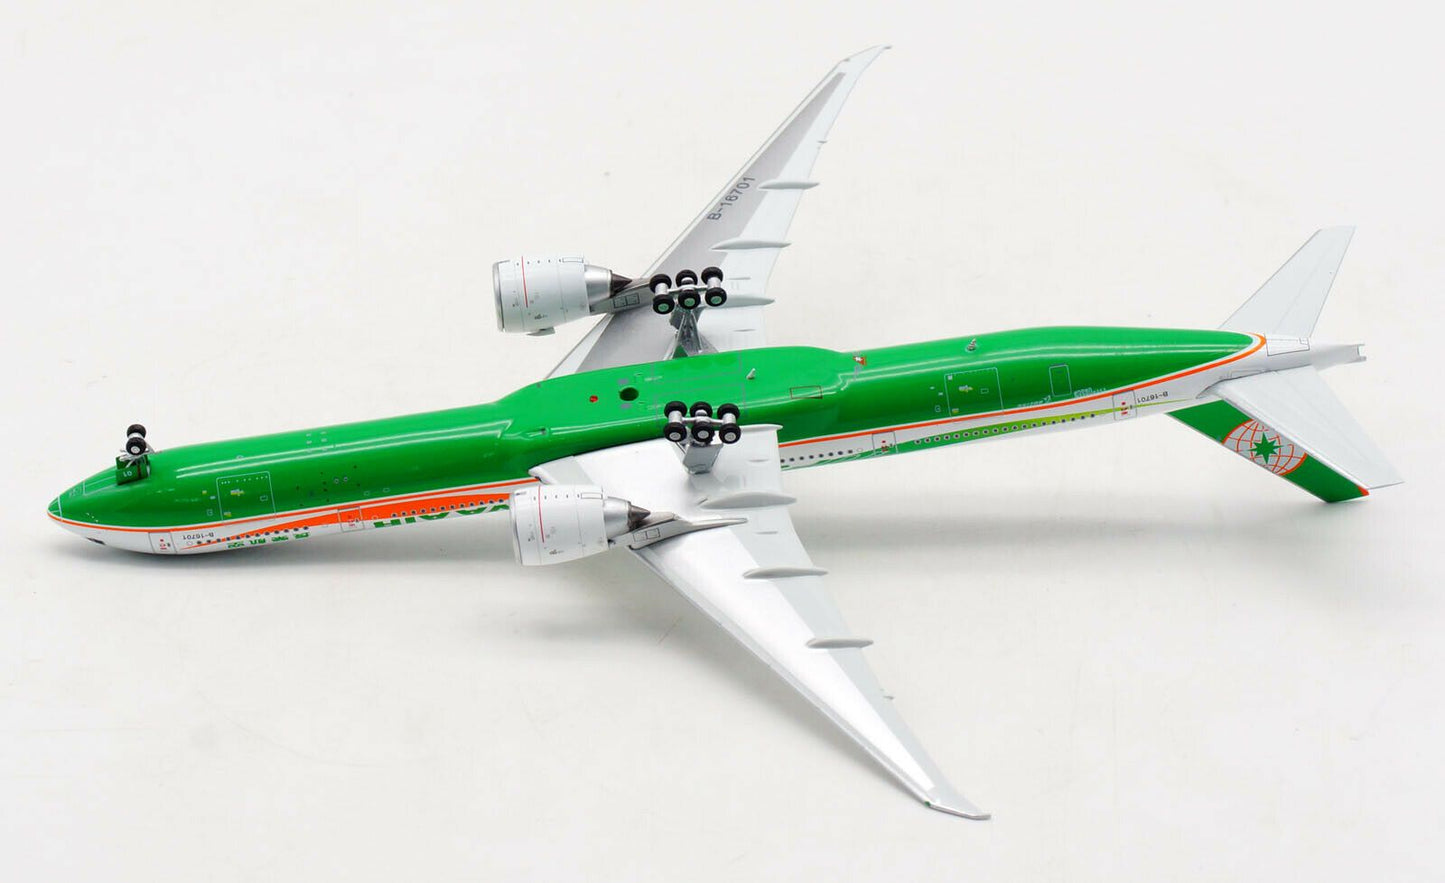 1/400 EVA Air B 777-300ER "Special 777-300ER Ribbon Livery" Aviation400 ALB4EVA701 (Includes free stand) - Midwest Model Store